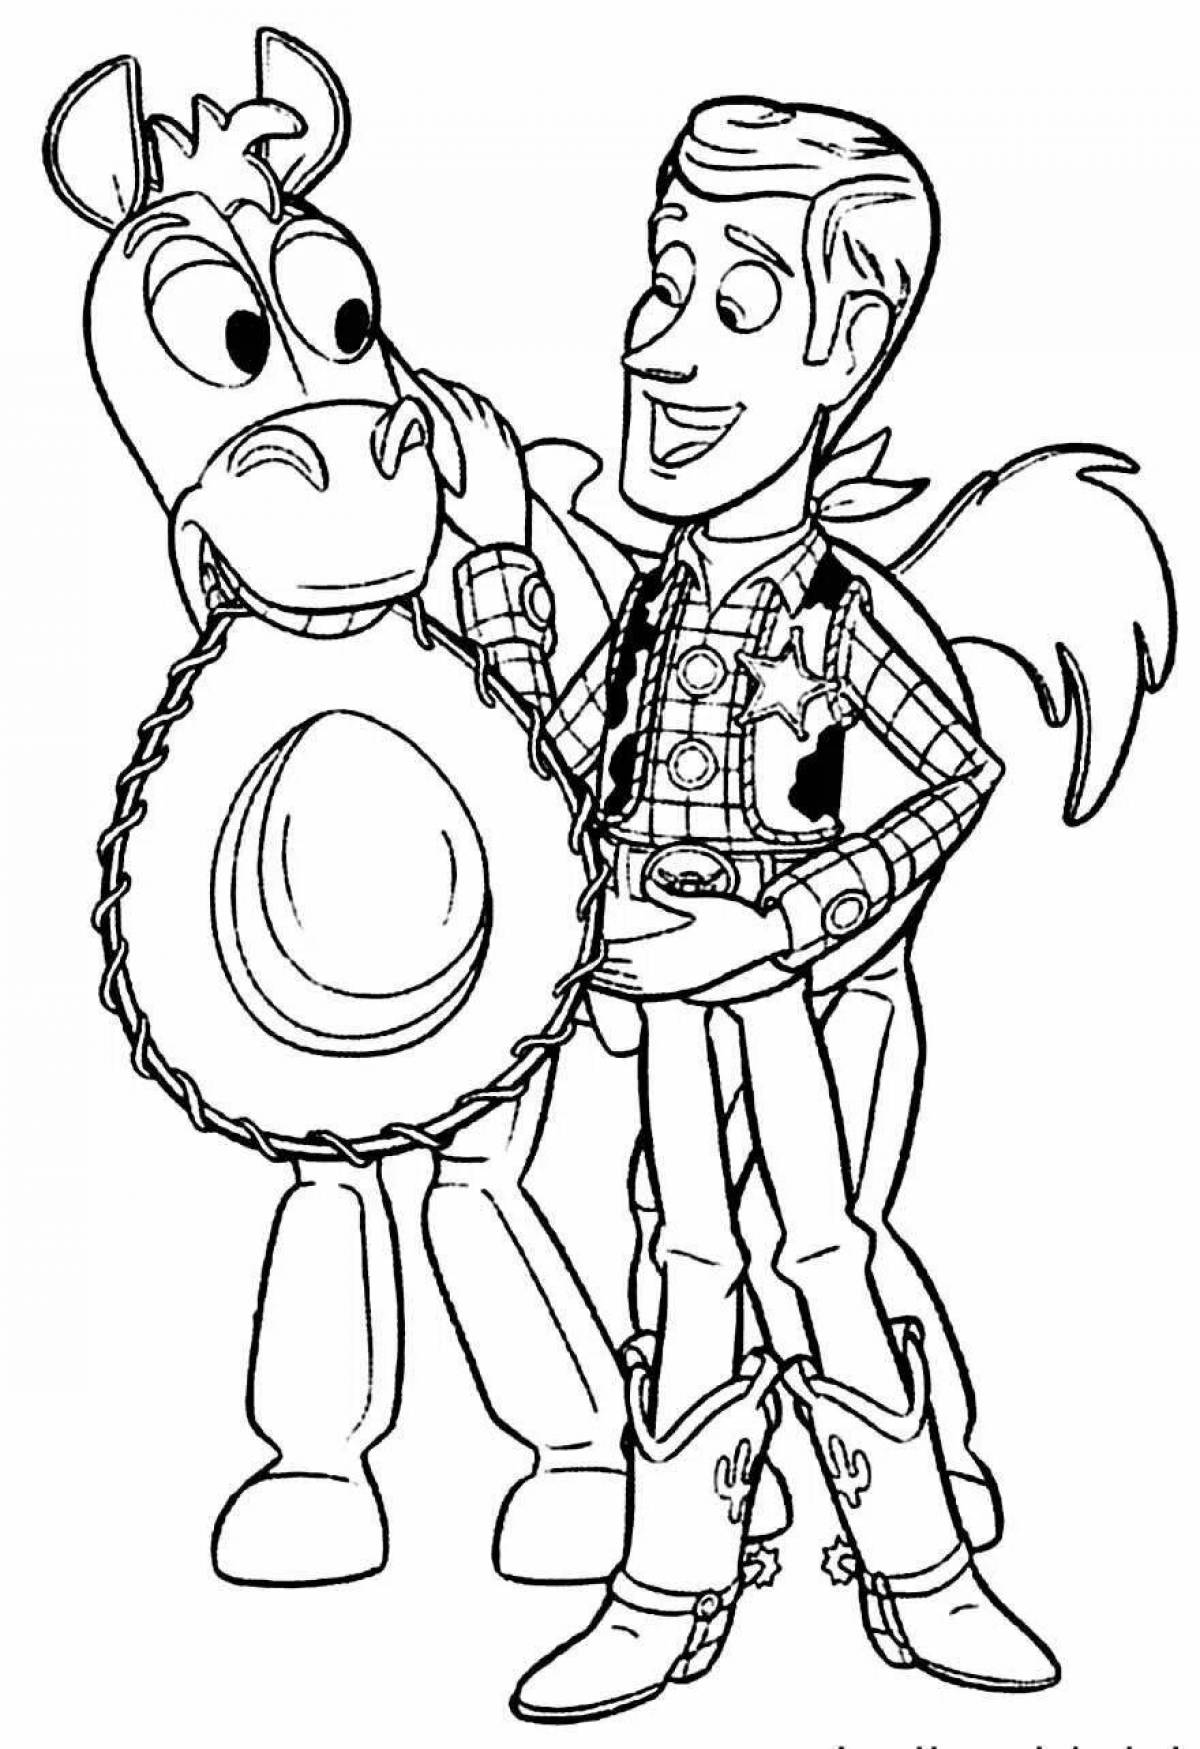 Color-bright andy coloring page